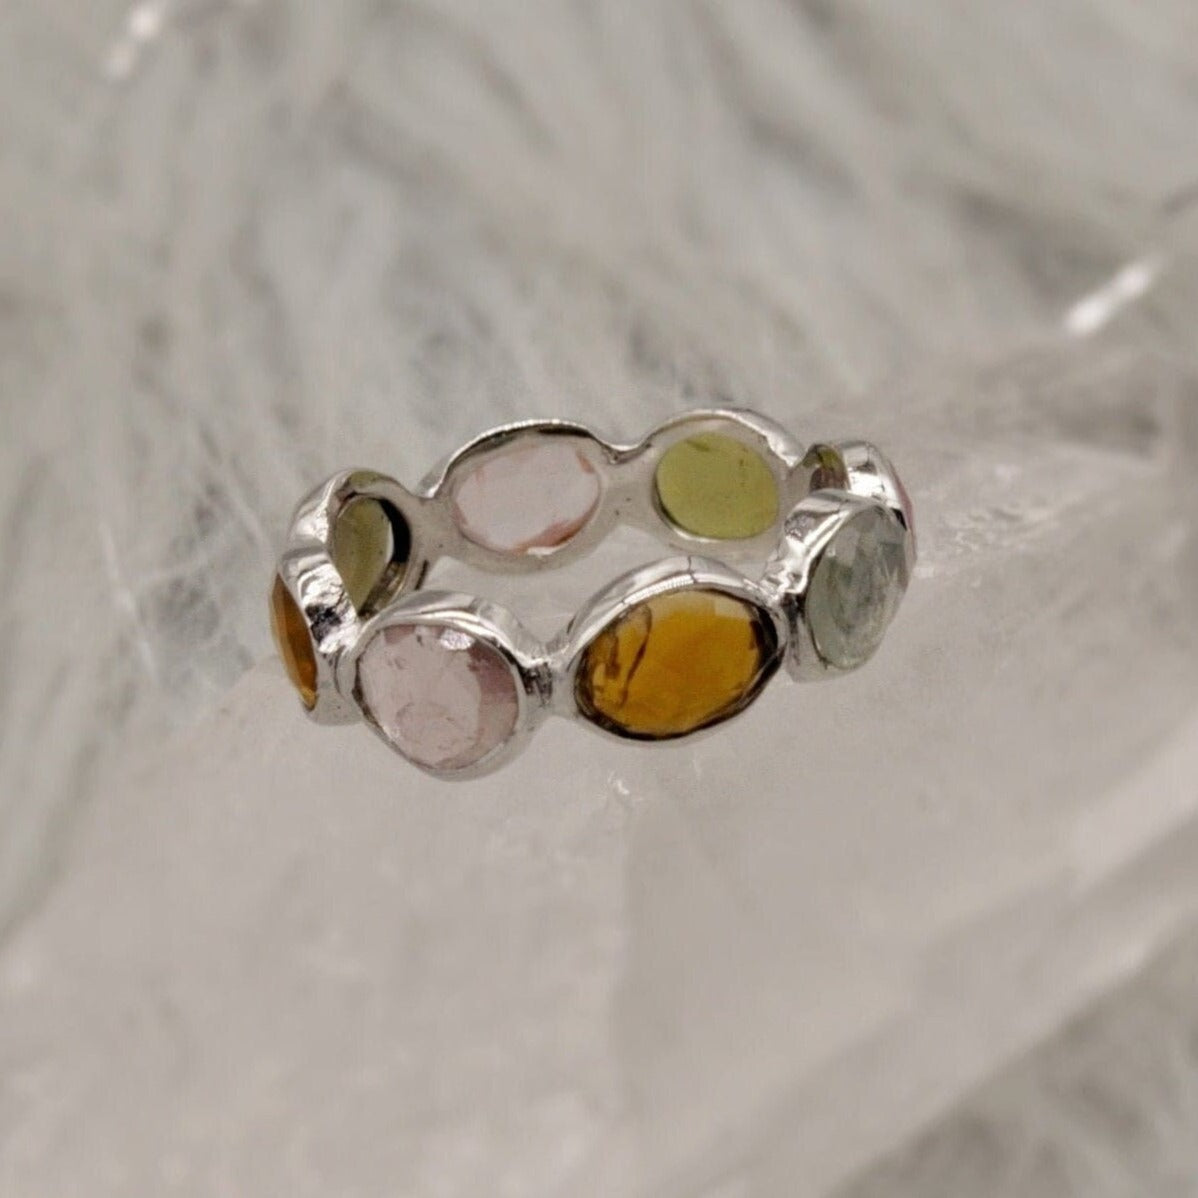 Raw Tourmaline Ring, 925 Sterling Silver Ring, Tourmaline Jewelry, October Birthstone, Raw Pink Green Gem Stone Eternity Ring, Gifts For Her